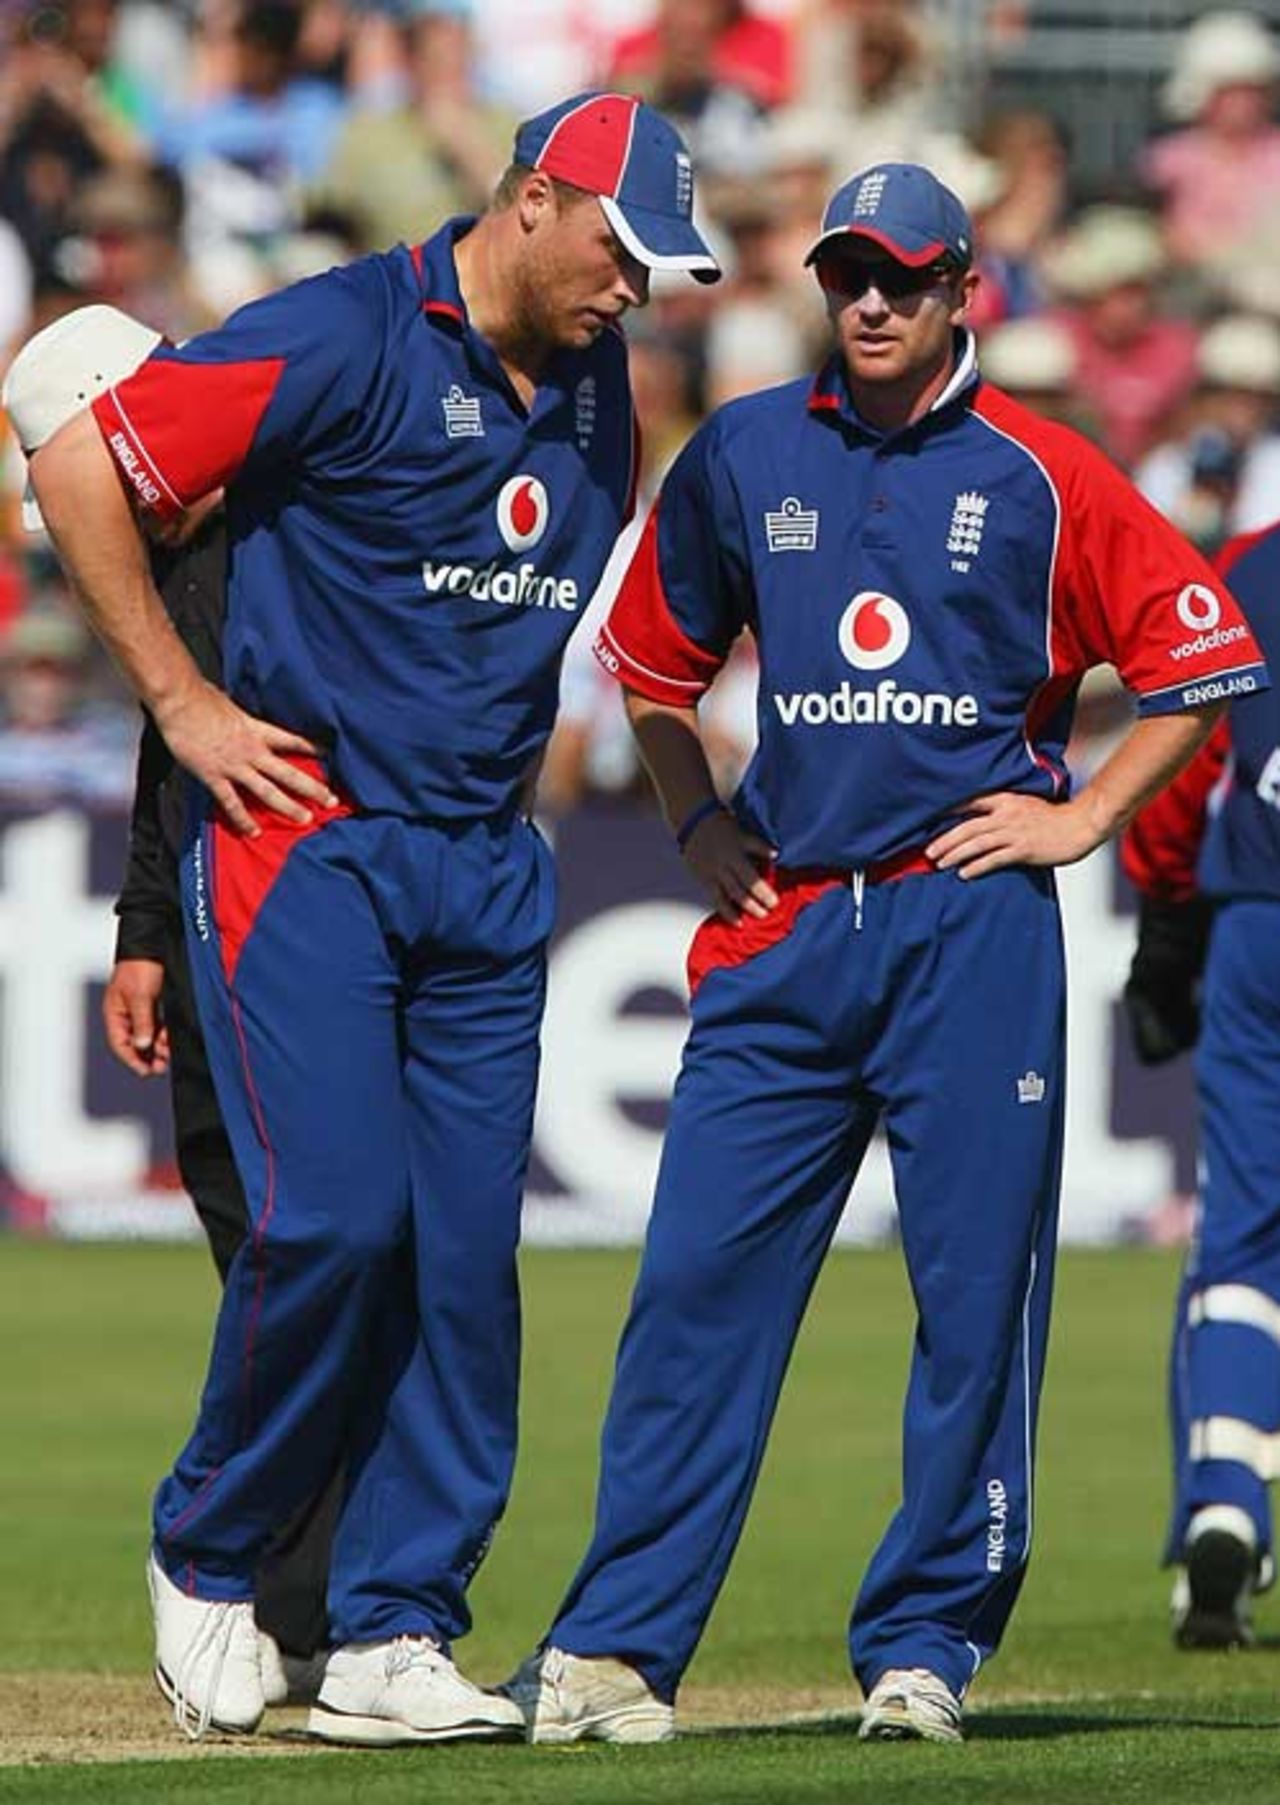 Andrew Flintoff felt pain in his knee after crashing into an advertising board during India's innings, England v India, 2nd ODI, Bristol, August 25, 2007